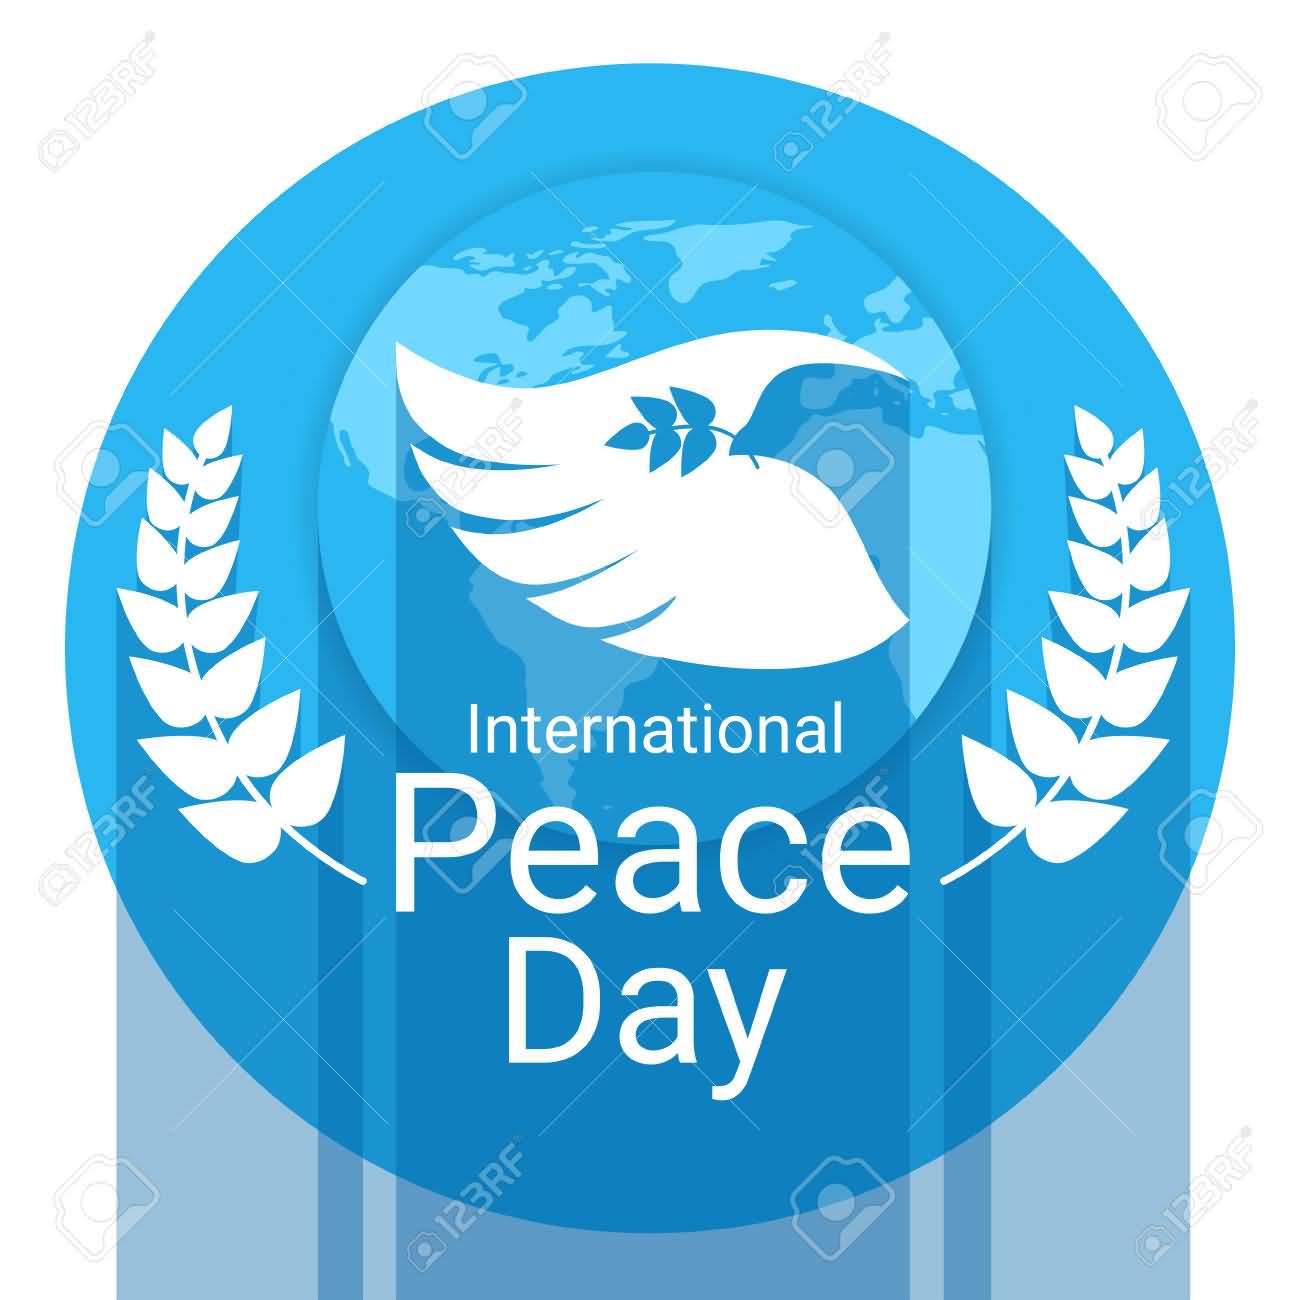 International Peace Day Olive Tree Branches Illustration